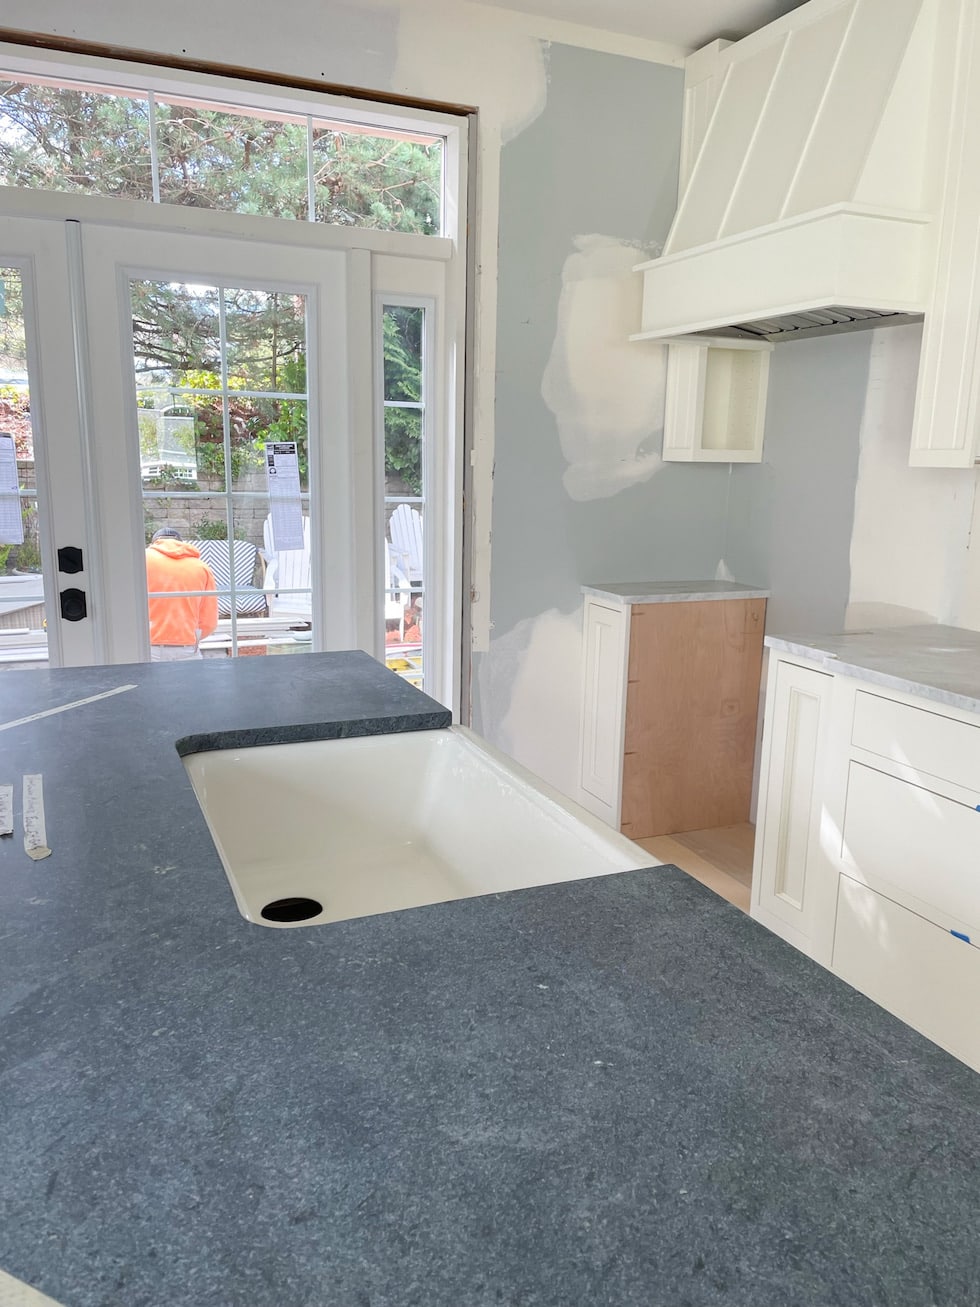 Kitchen Renovation Update: Marble, Soapstone, French Doors and Beadboard!